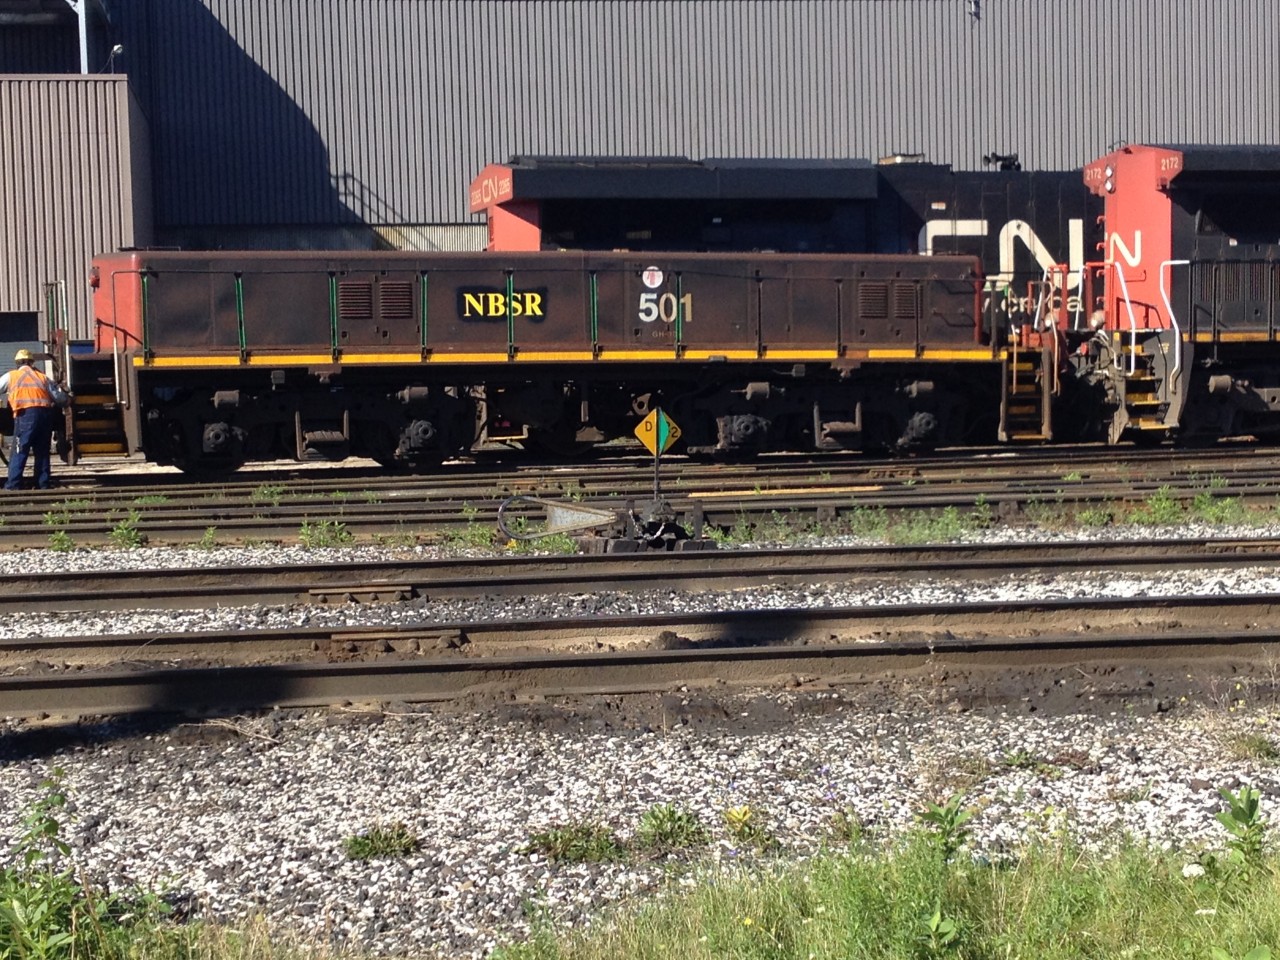 CN HBU-4 3 501 relettered for NBSR is being inspected along with NSBR  yard slug #268 for departure on train 376. The units are slated to be dropped of in St John's